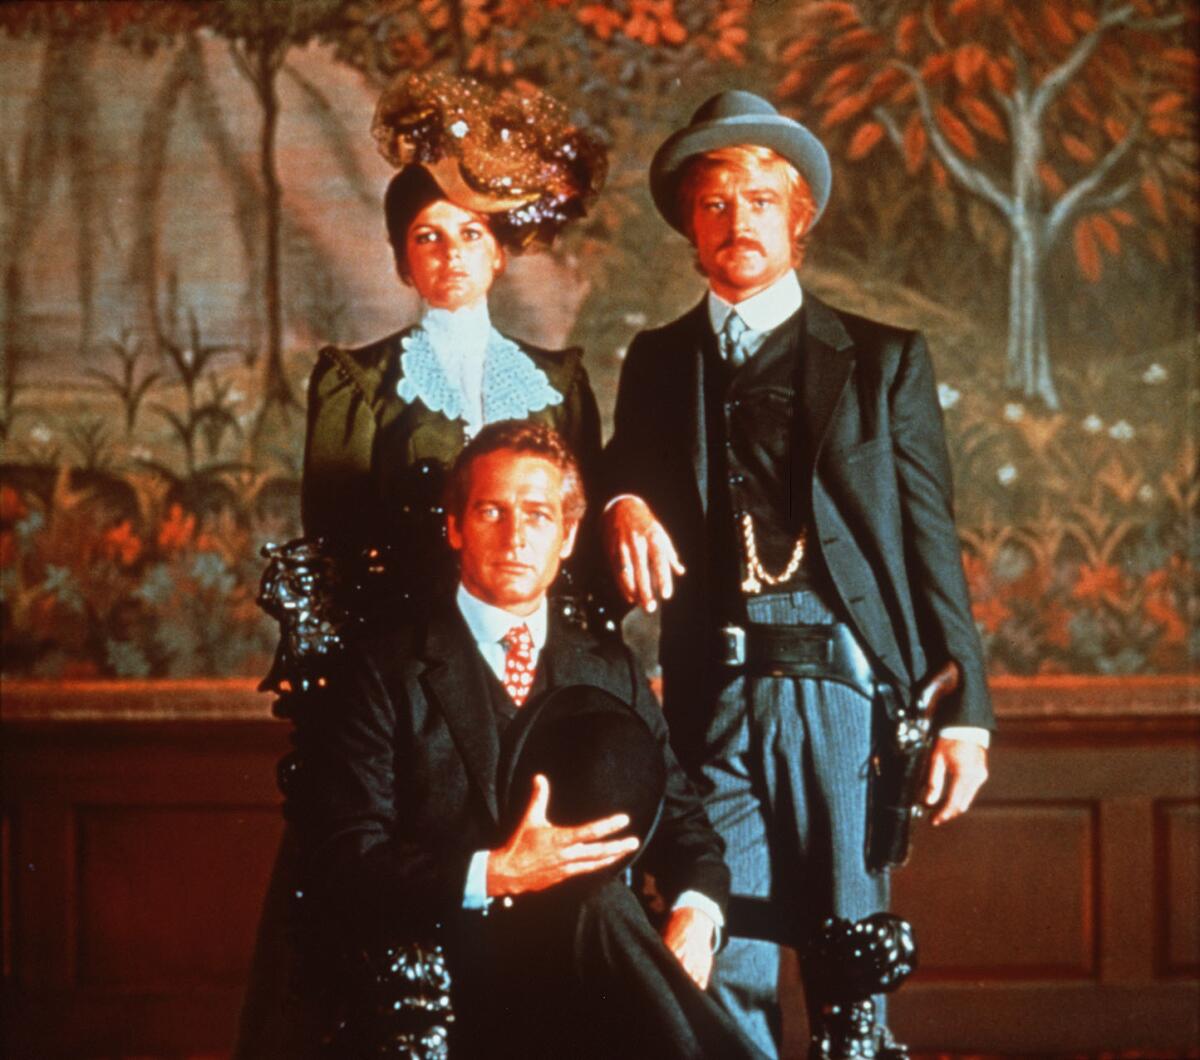 Katherine Ross, left, Paul Newman and Robert Redford pose for a photo in "Butch Cassidy and the Sundance Kid" (1969).